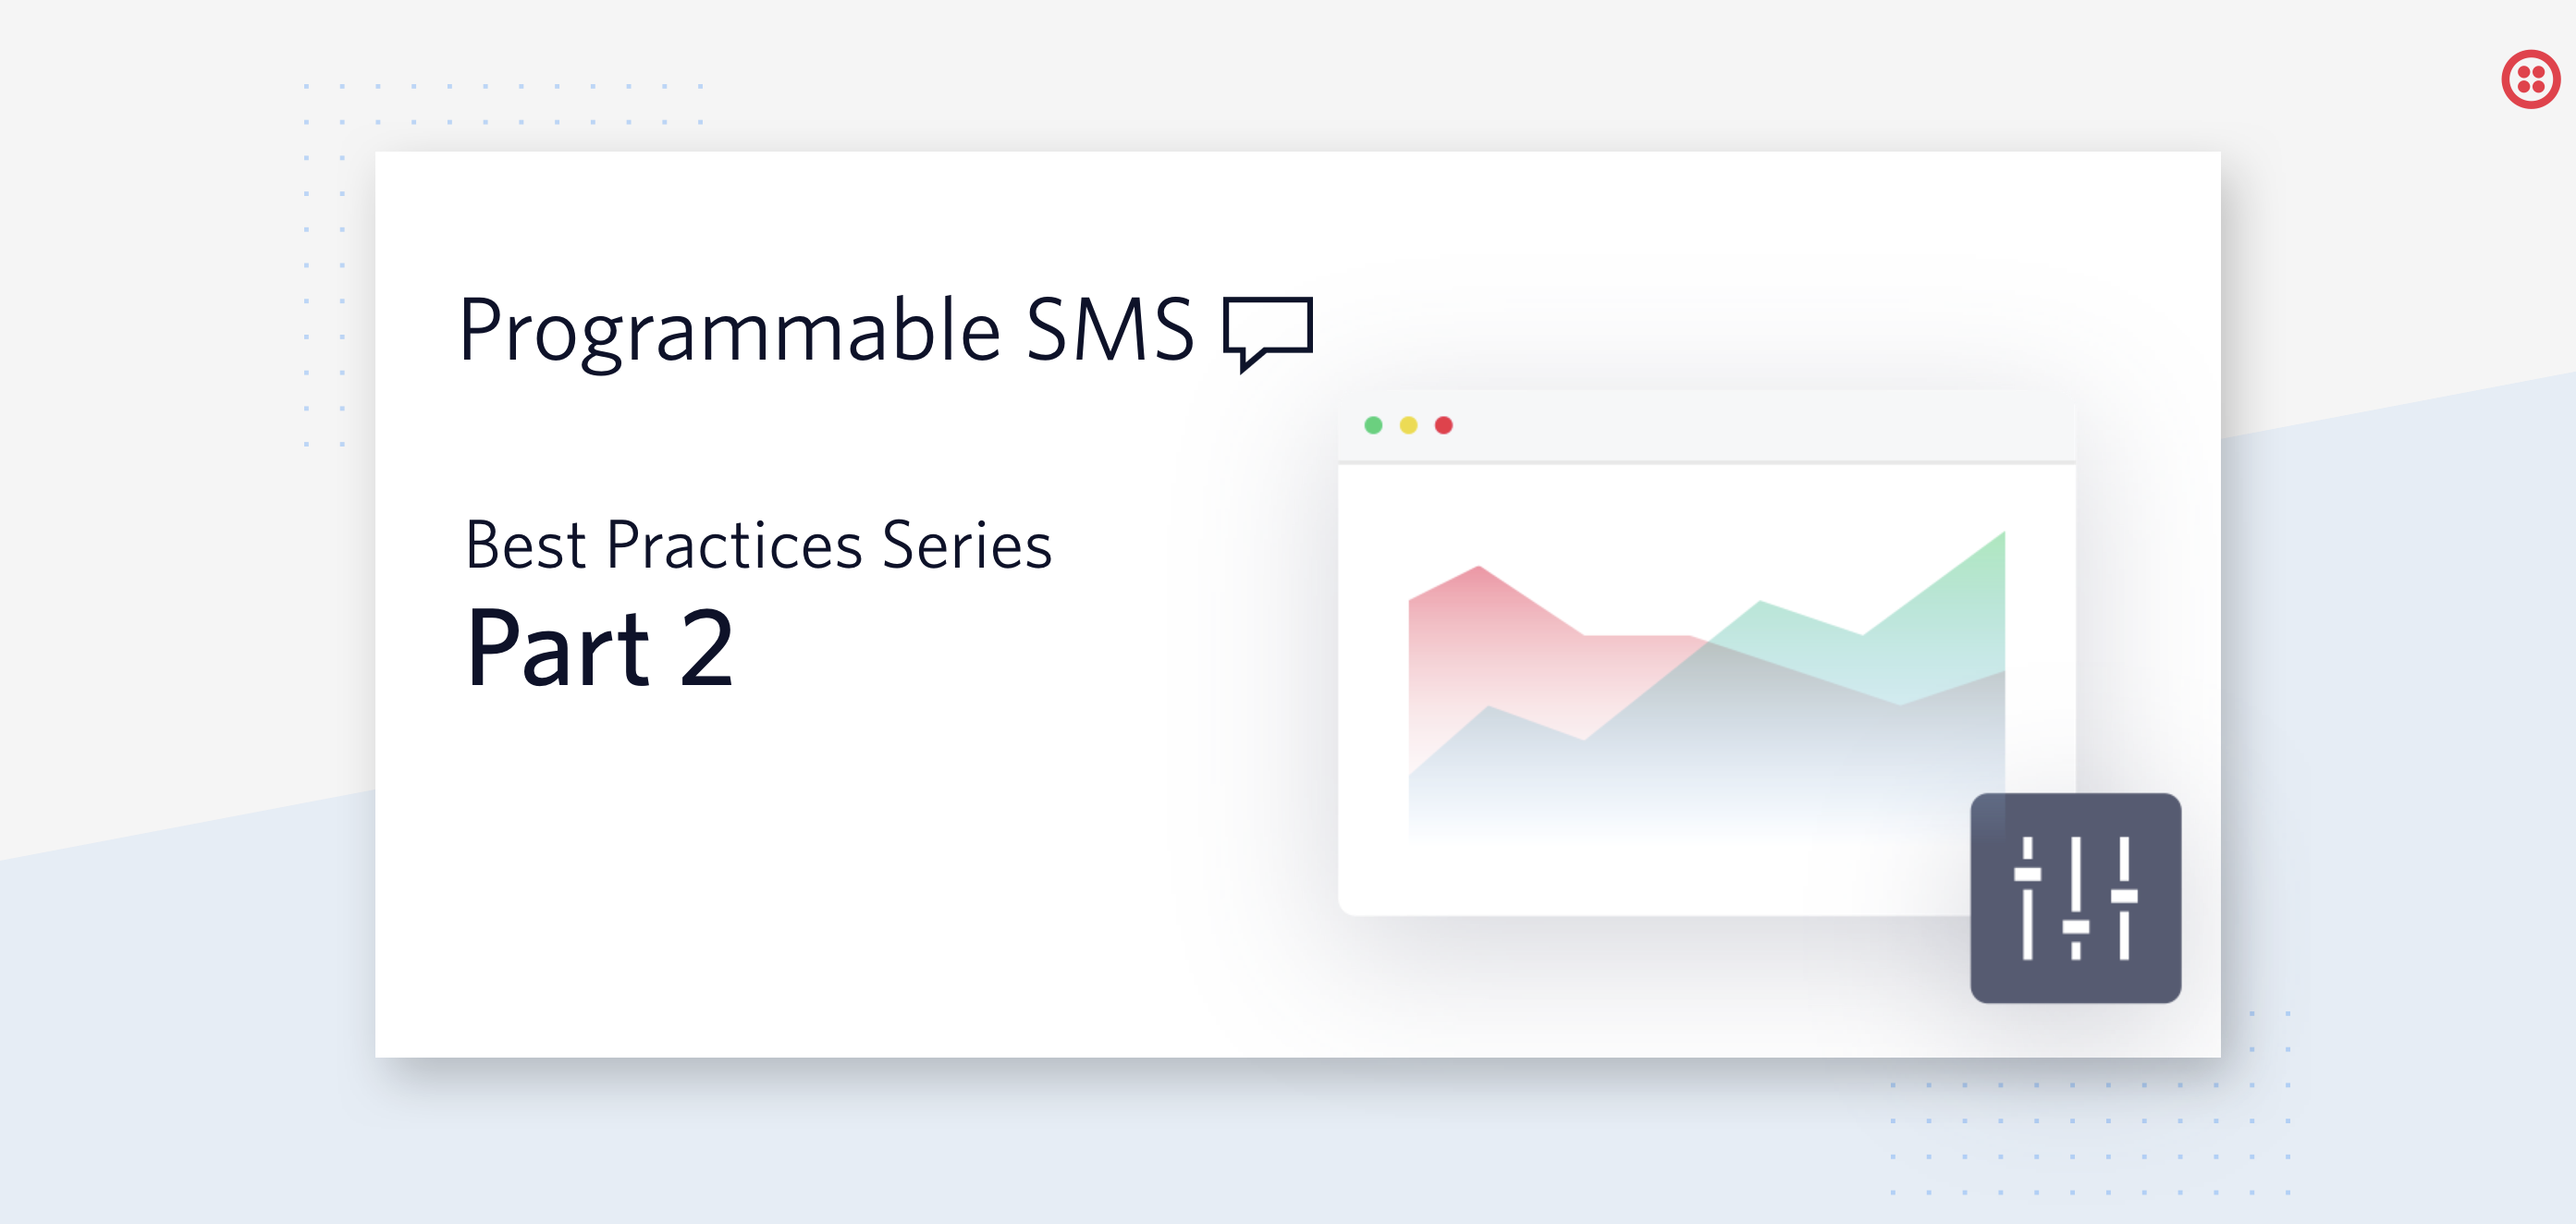 Programmable SMS - Using Twilio’s Messaging Service & Co-pilot Features